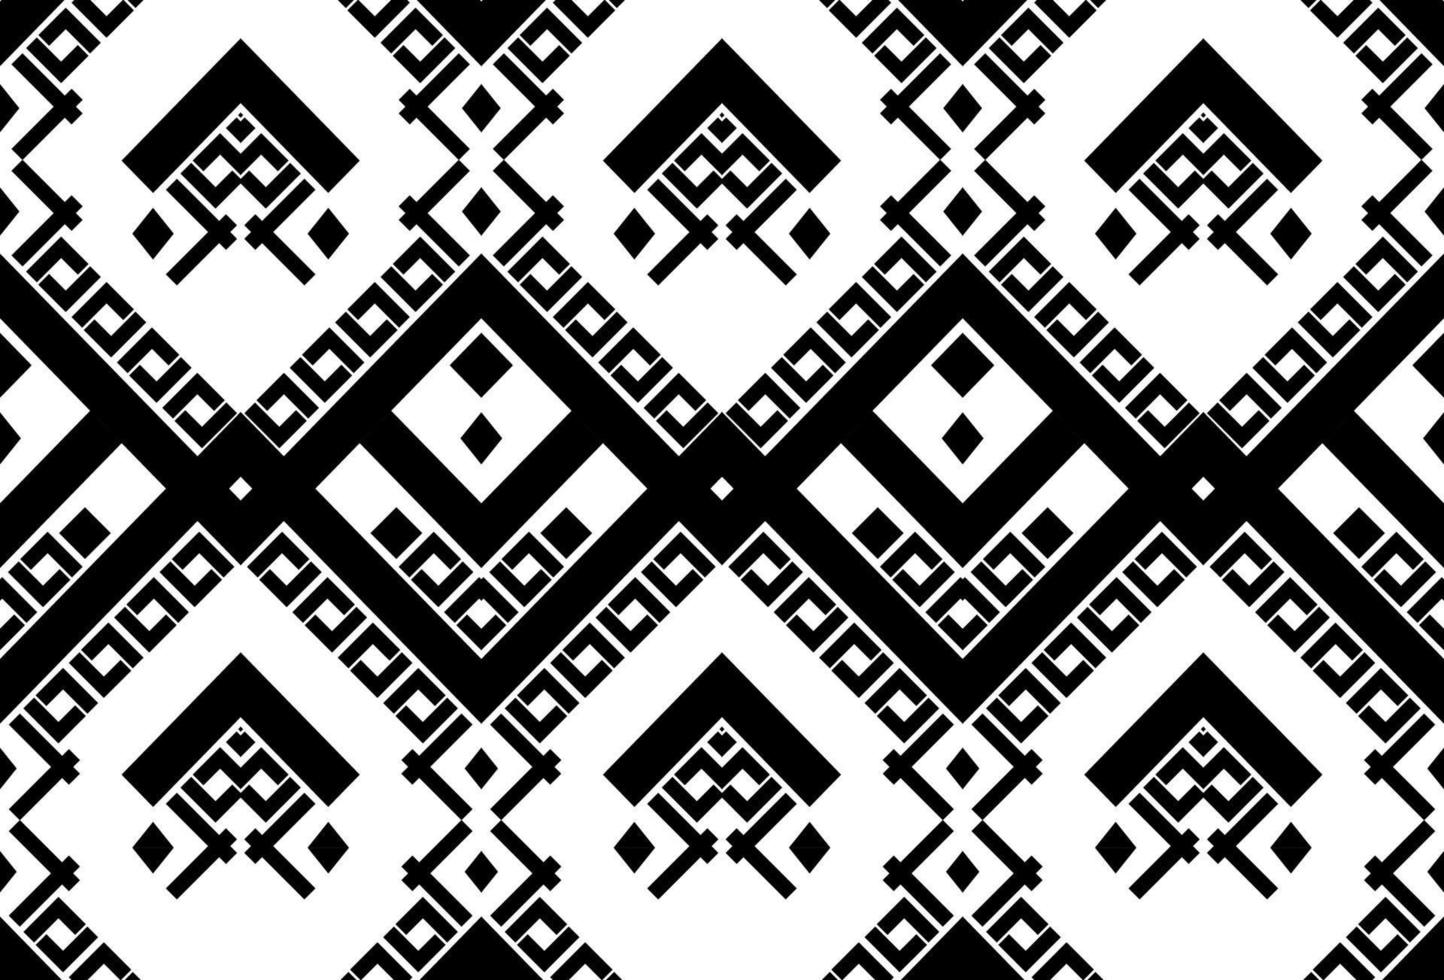 ethnic oriental ikat seamless pattern traditional Design for background,carpet,wallpaper,clothing,wrapping,batik,fabric,vector illustration. embroidery style. vector